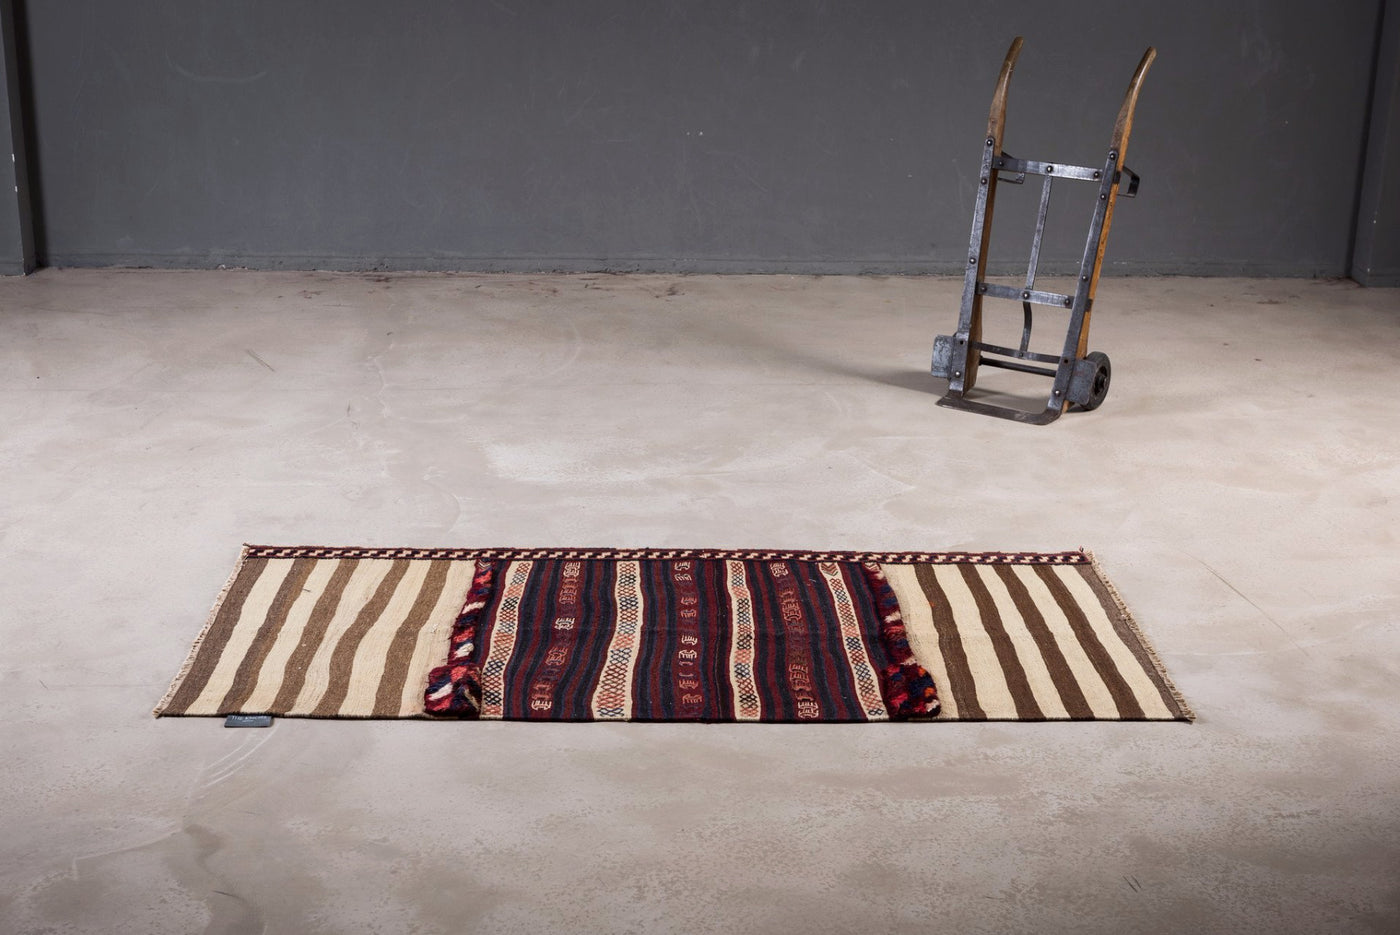 THE KNOTS - Vintage Persian Kilim Teppich - handgemacht - Carpet - Rug - handmade - pattern - muster - wool - wolle - diamond - red - burgundy - brown - striped